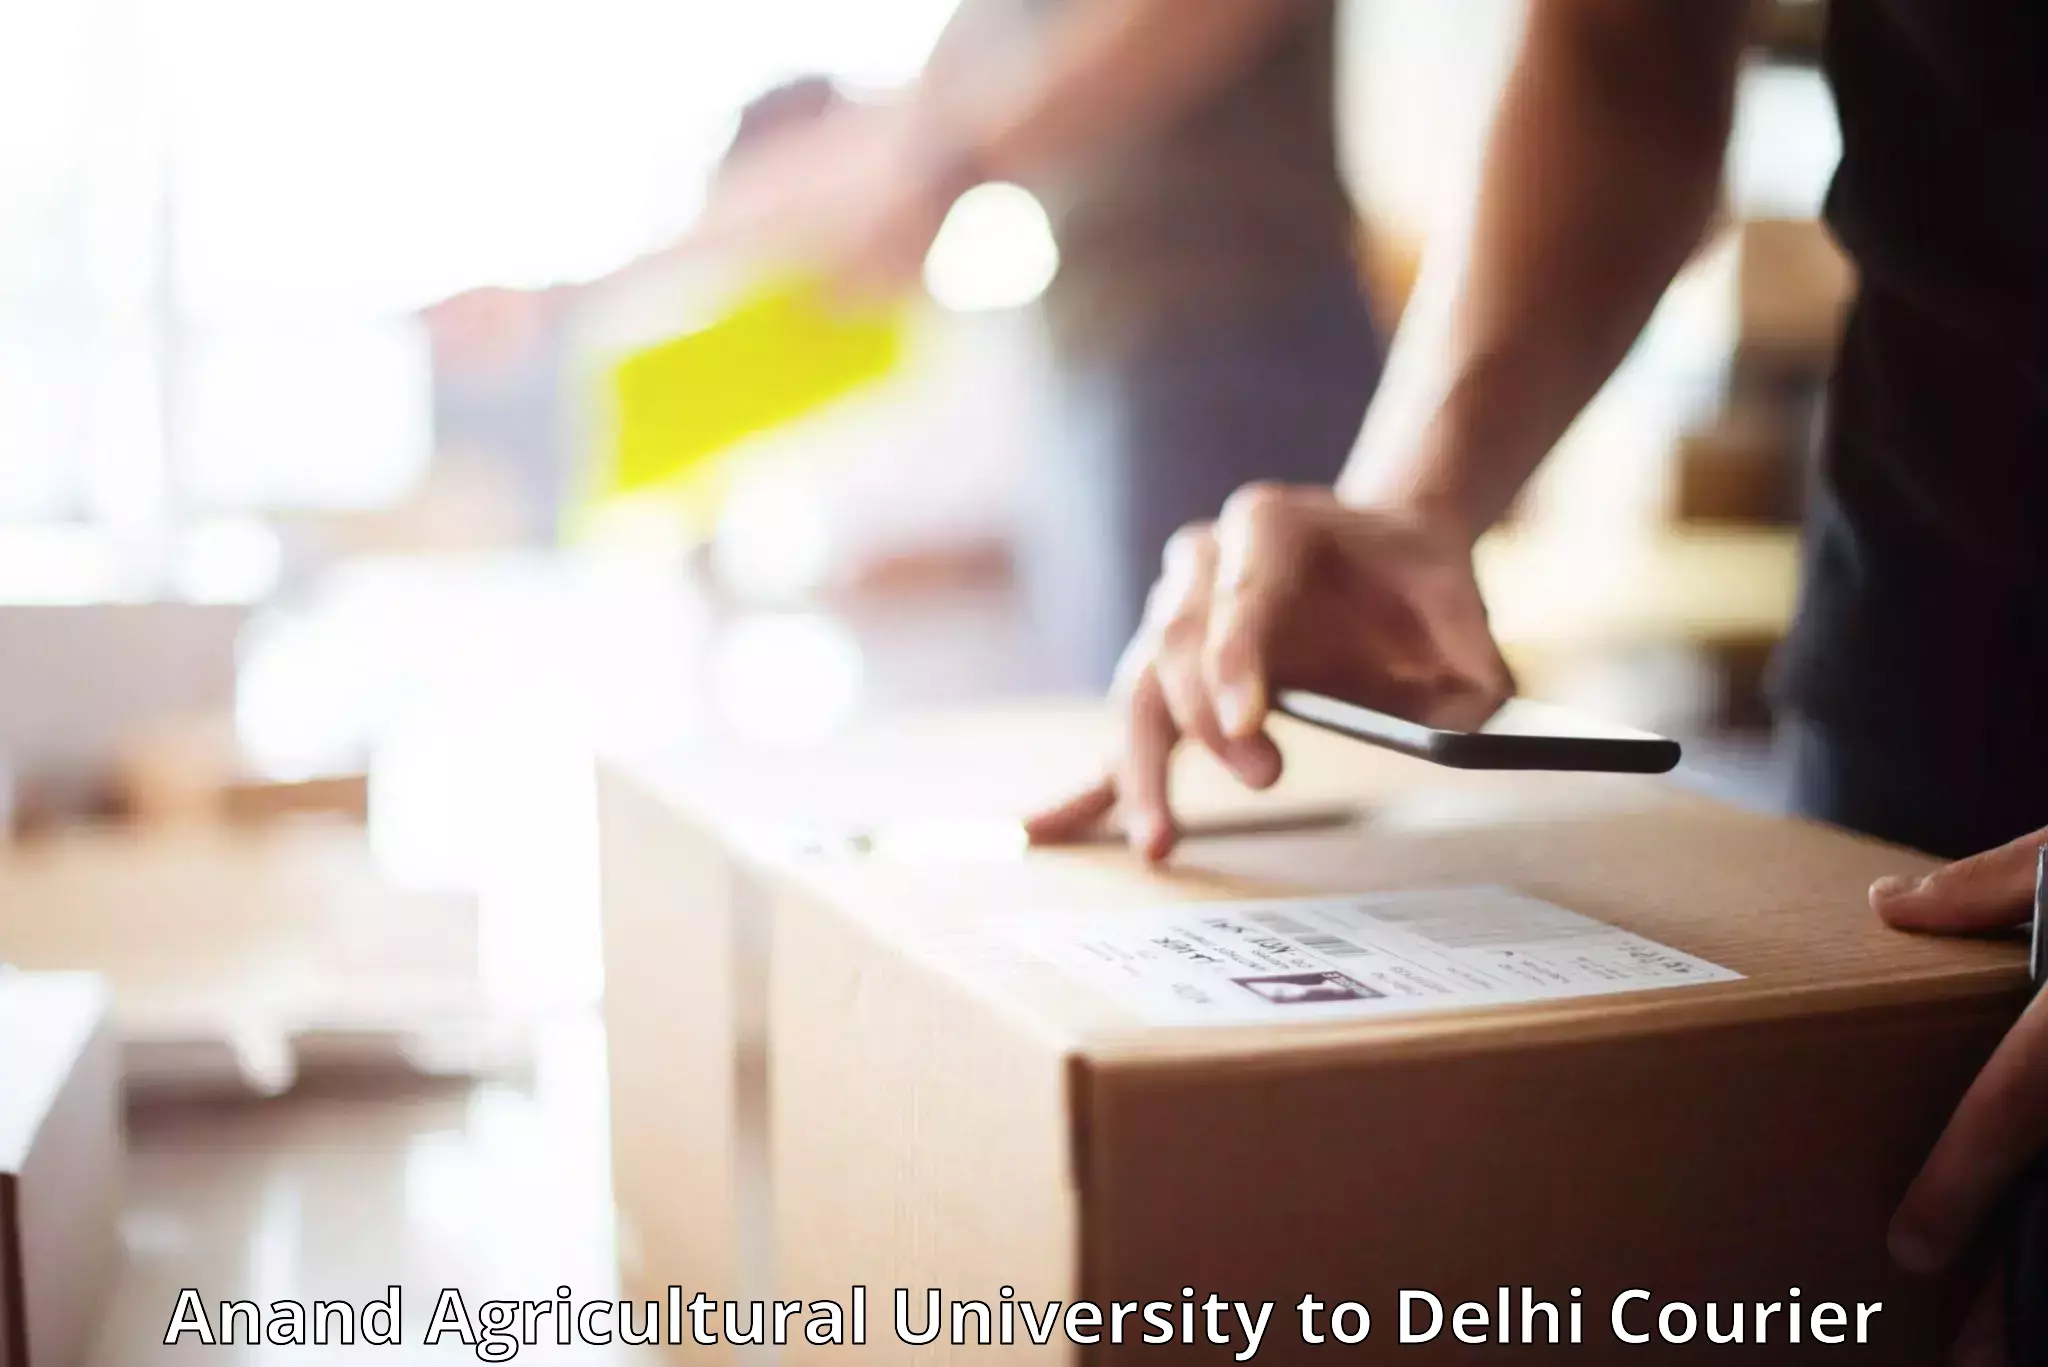 Baggage transport estimate Anand Agricultural University to IIT Delhi